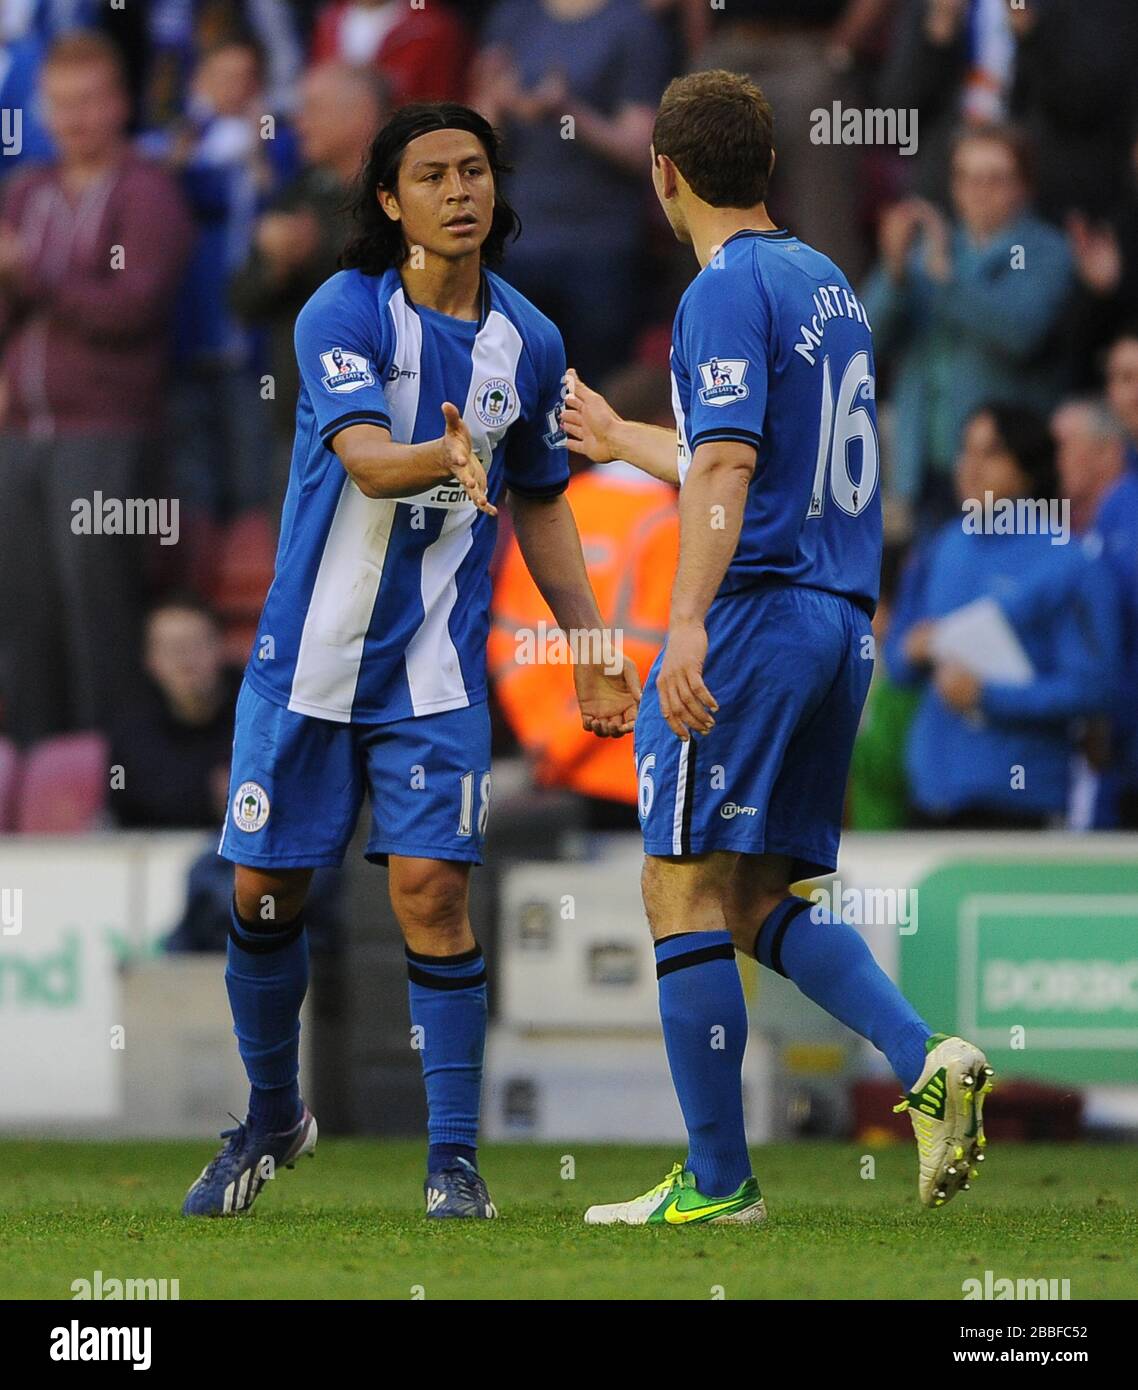 Wigan Athletic's Roger Espinoza (left) is congratulated by James McArthur after scoring the opening goal against Swansea City. Stock Photo